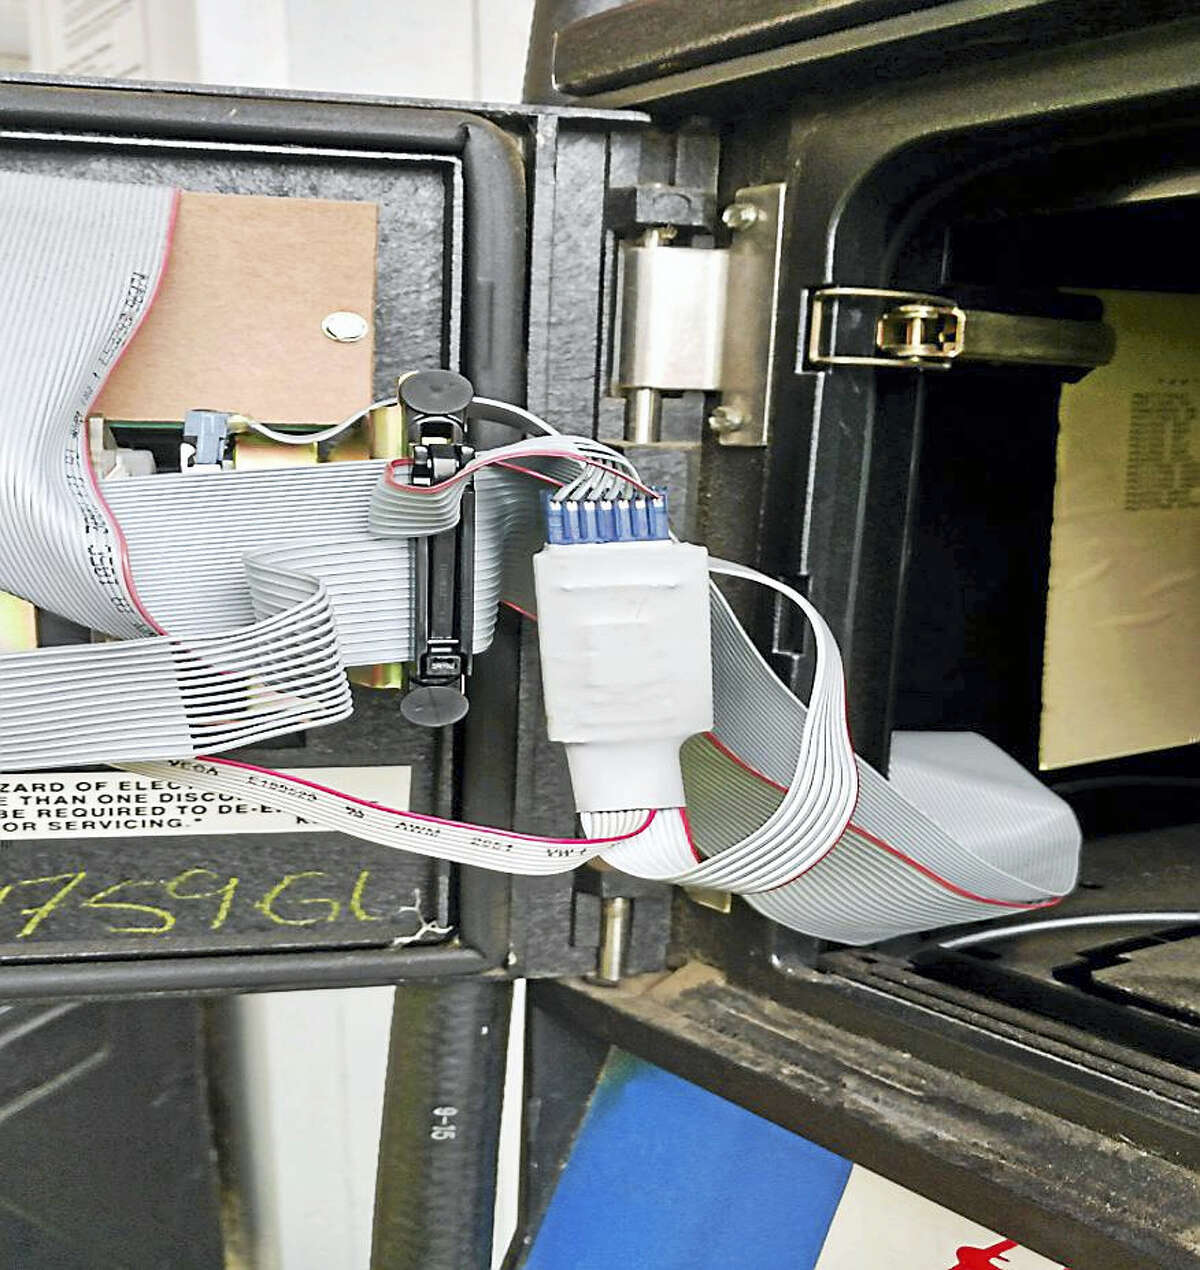 The inside of the gas pump payment system where the card skimming device was found on Tuesday in Essex